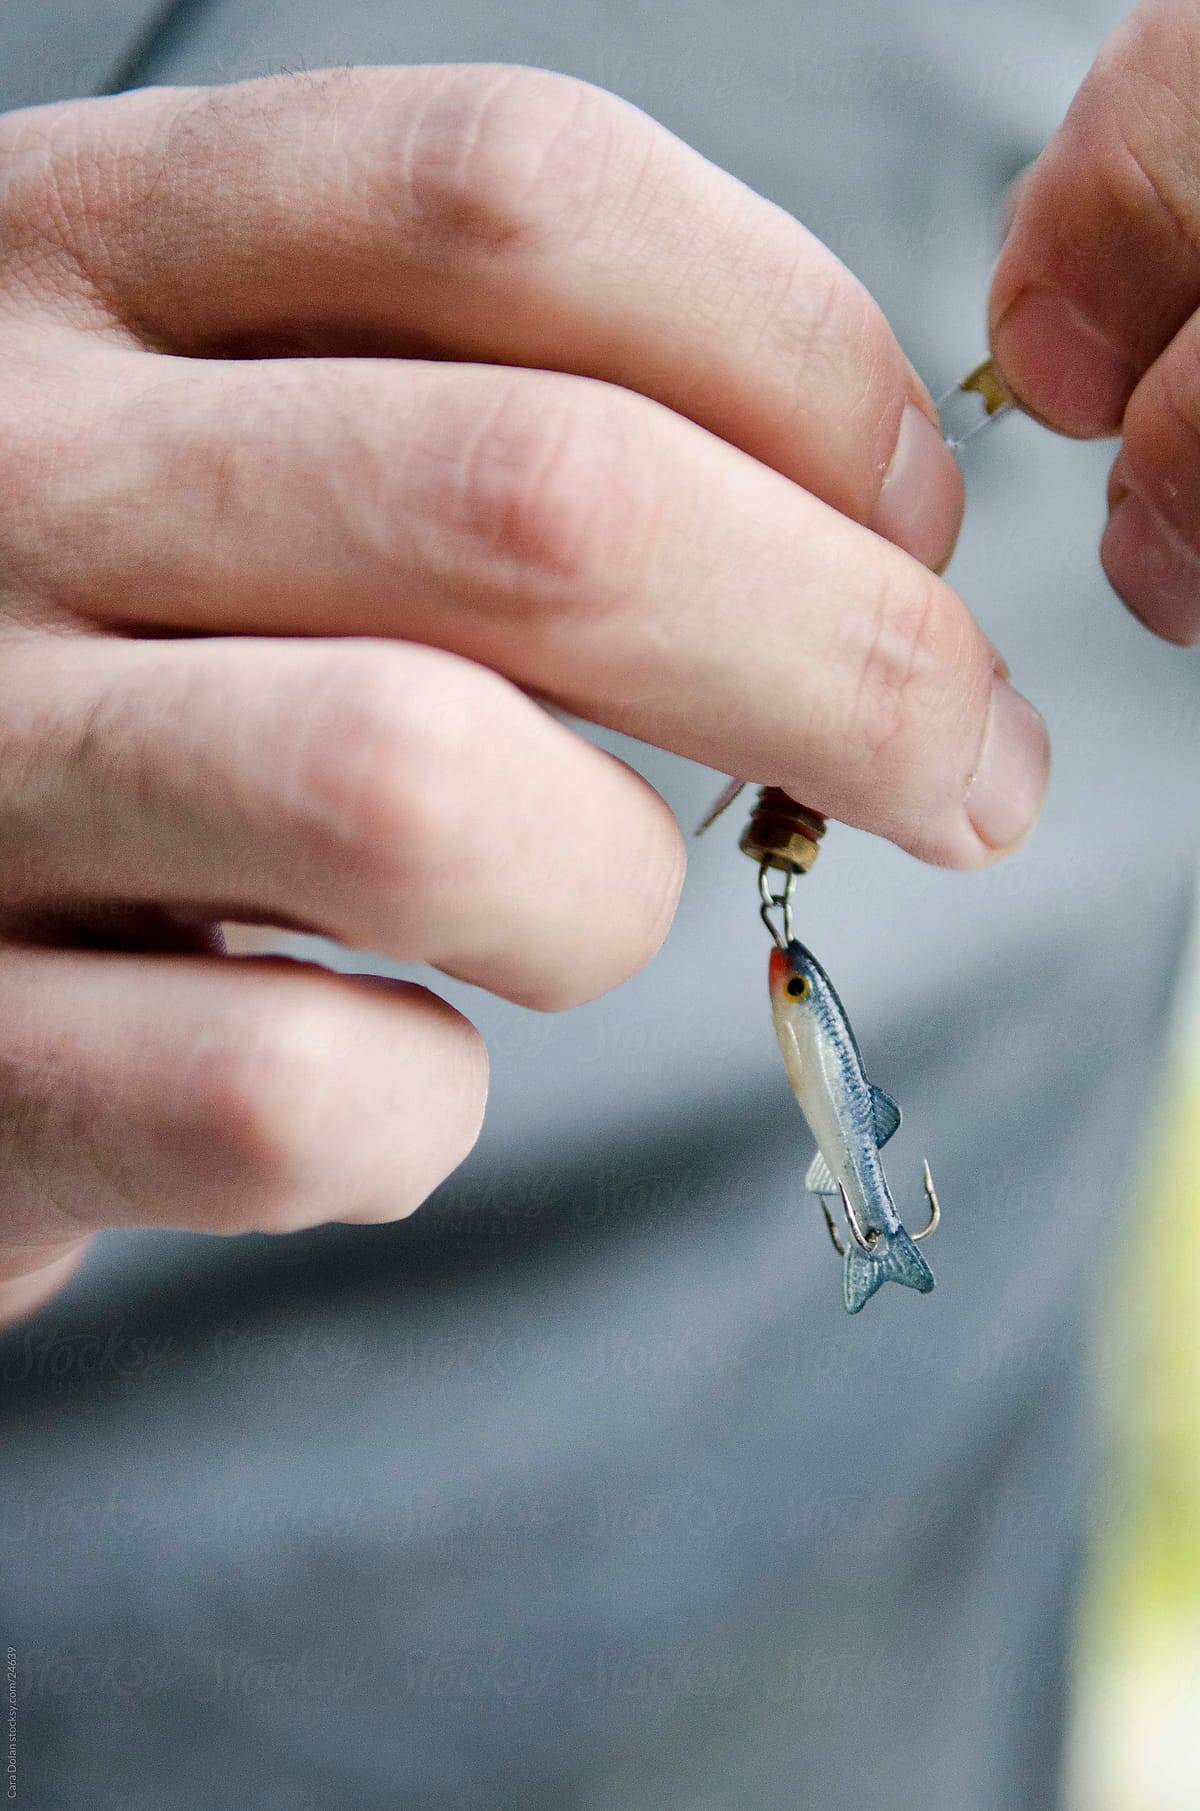 Man adds lure to fishing line